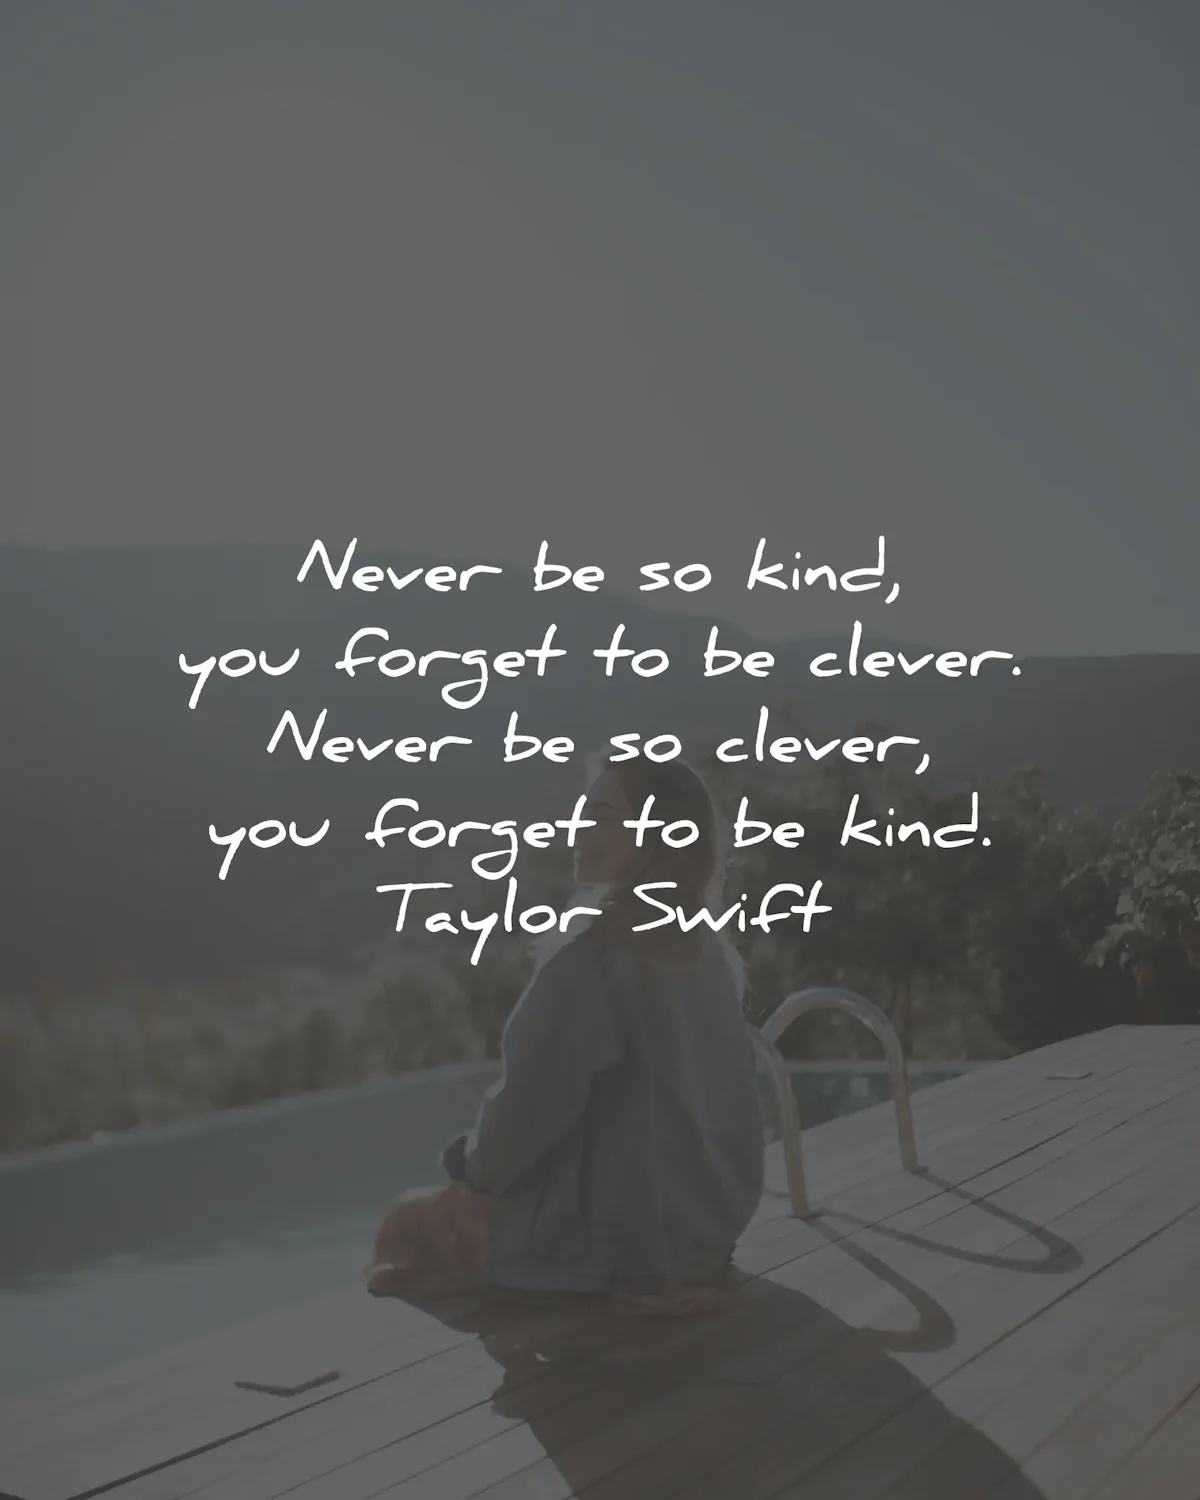 kindness quotes never forget clever taylor swift wisdom